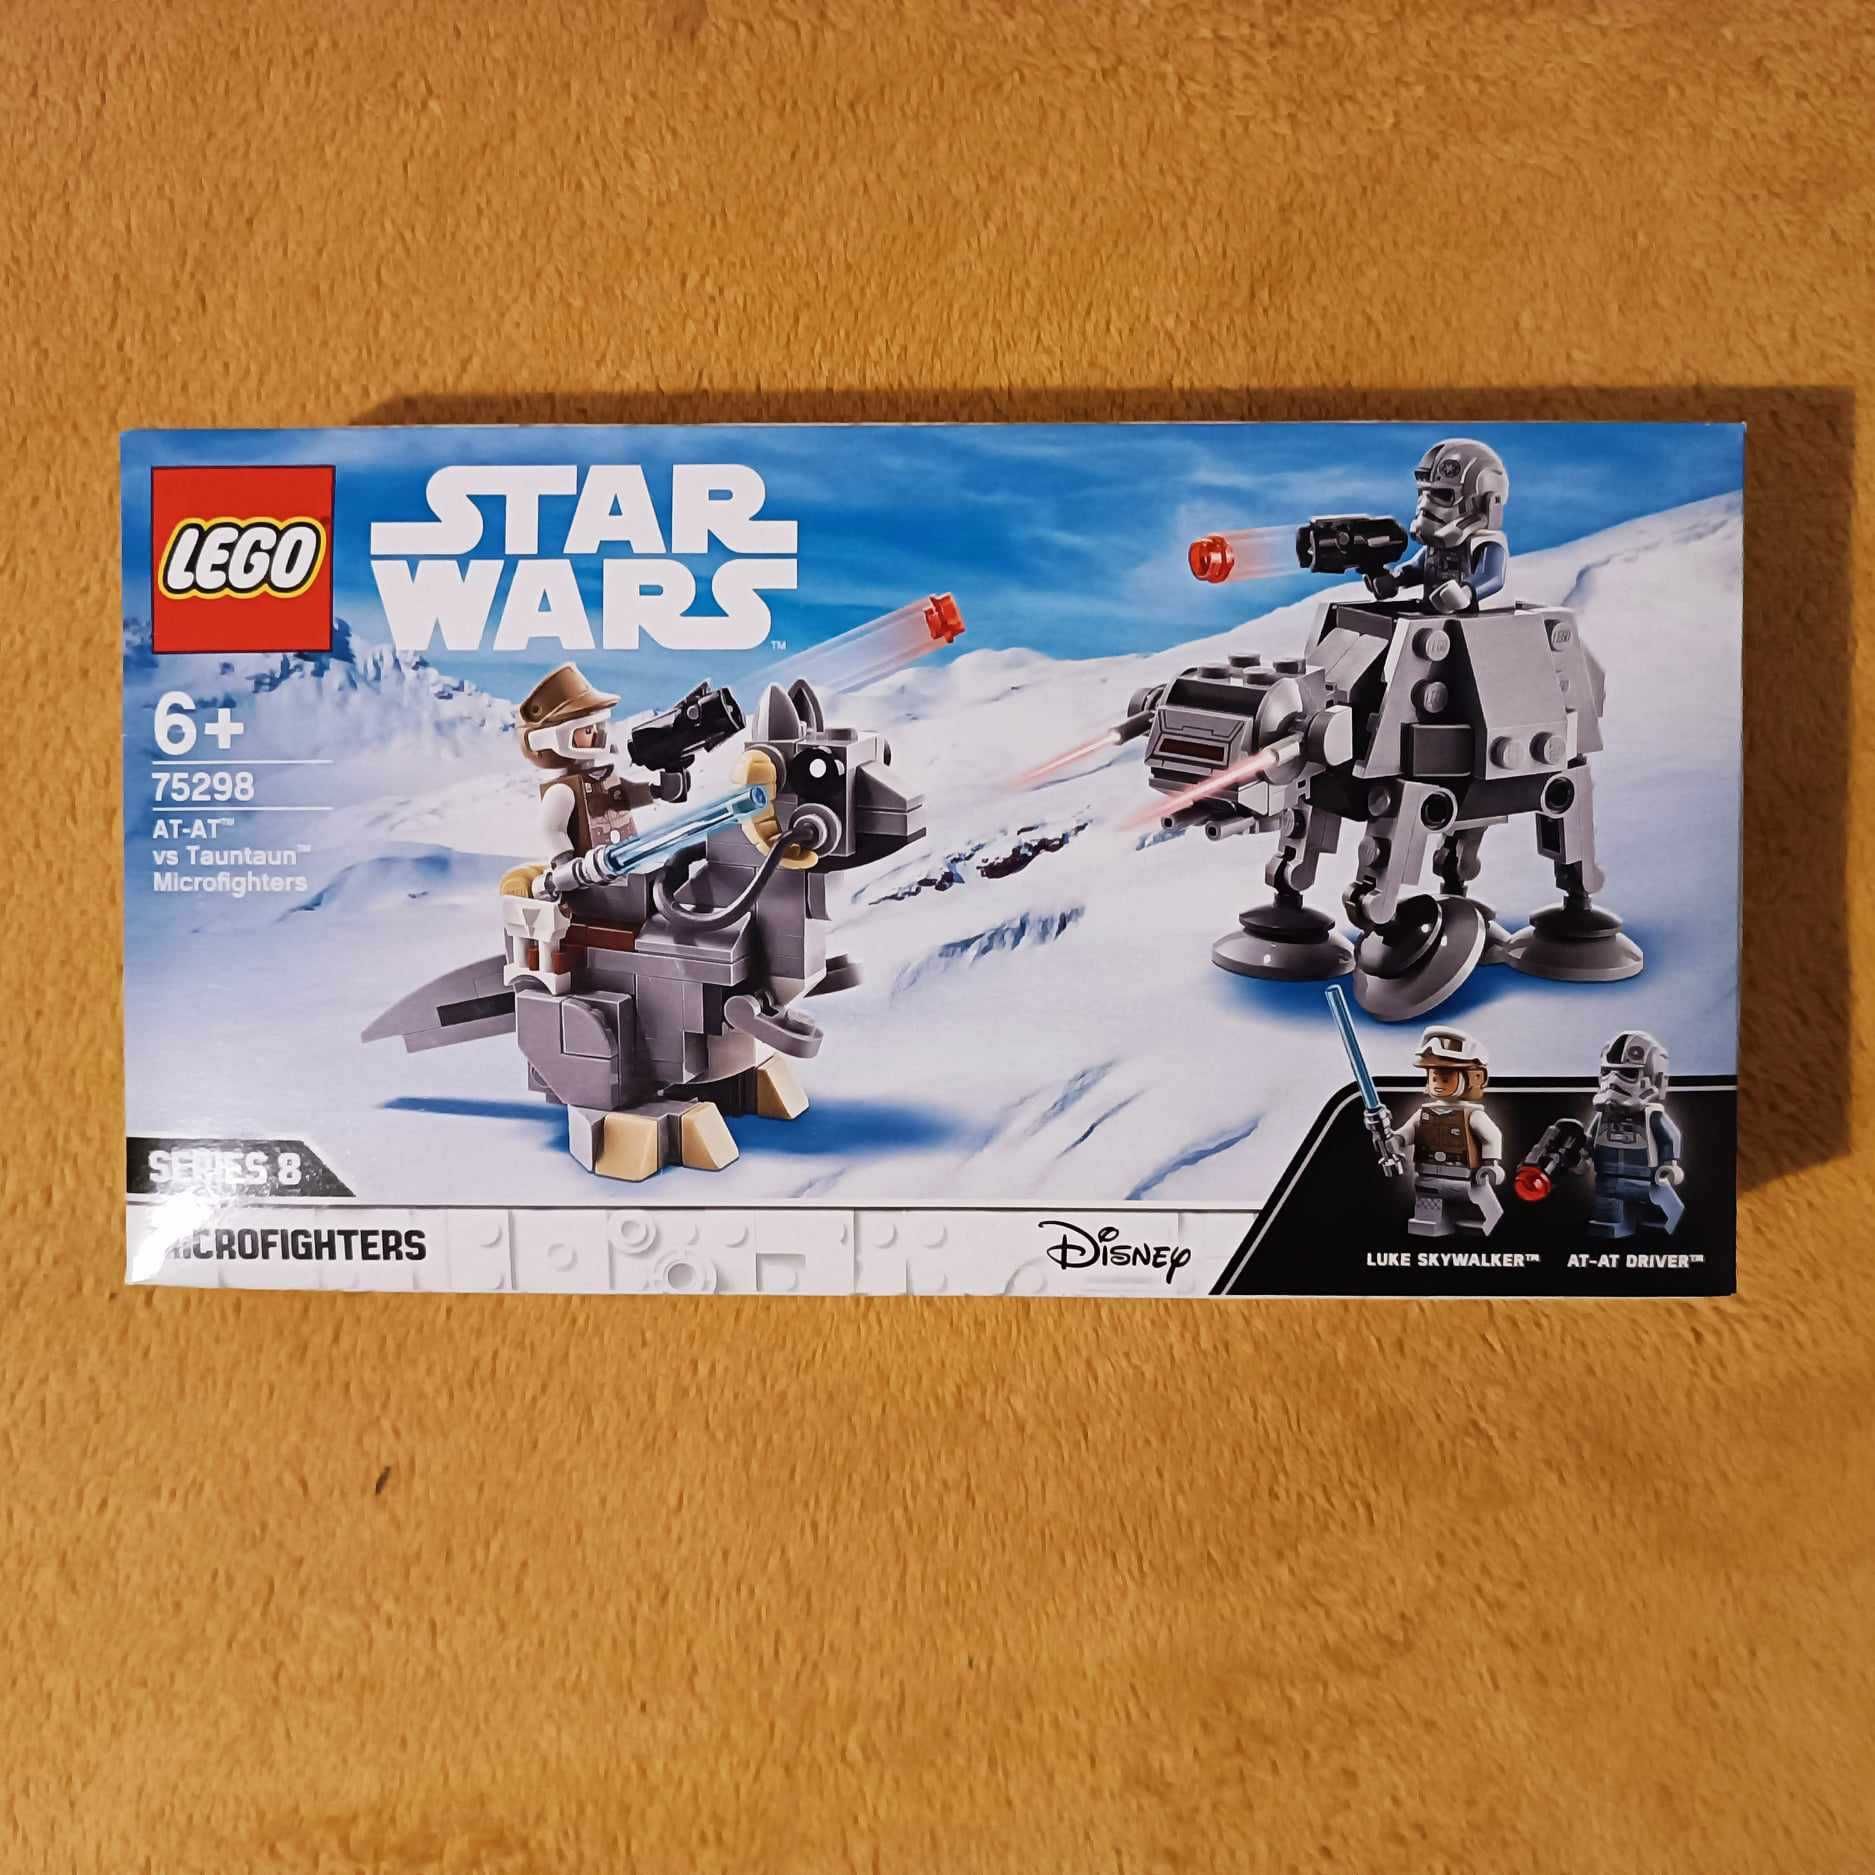 LEGO NOWY 75298 - Mikromyśliwce: AT-AT kontra Tauntaun